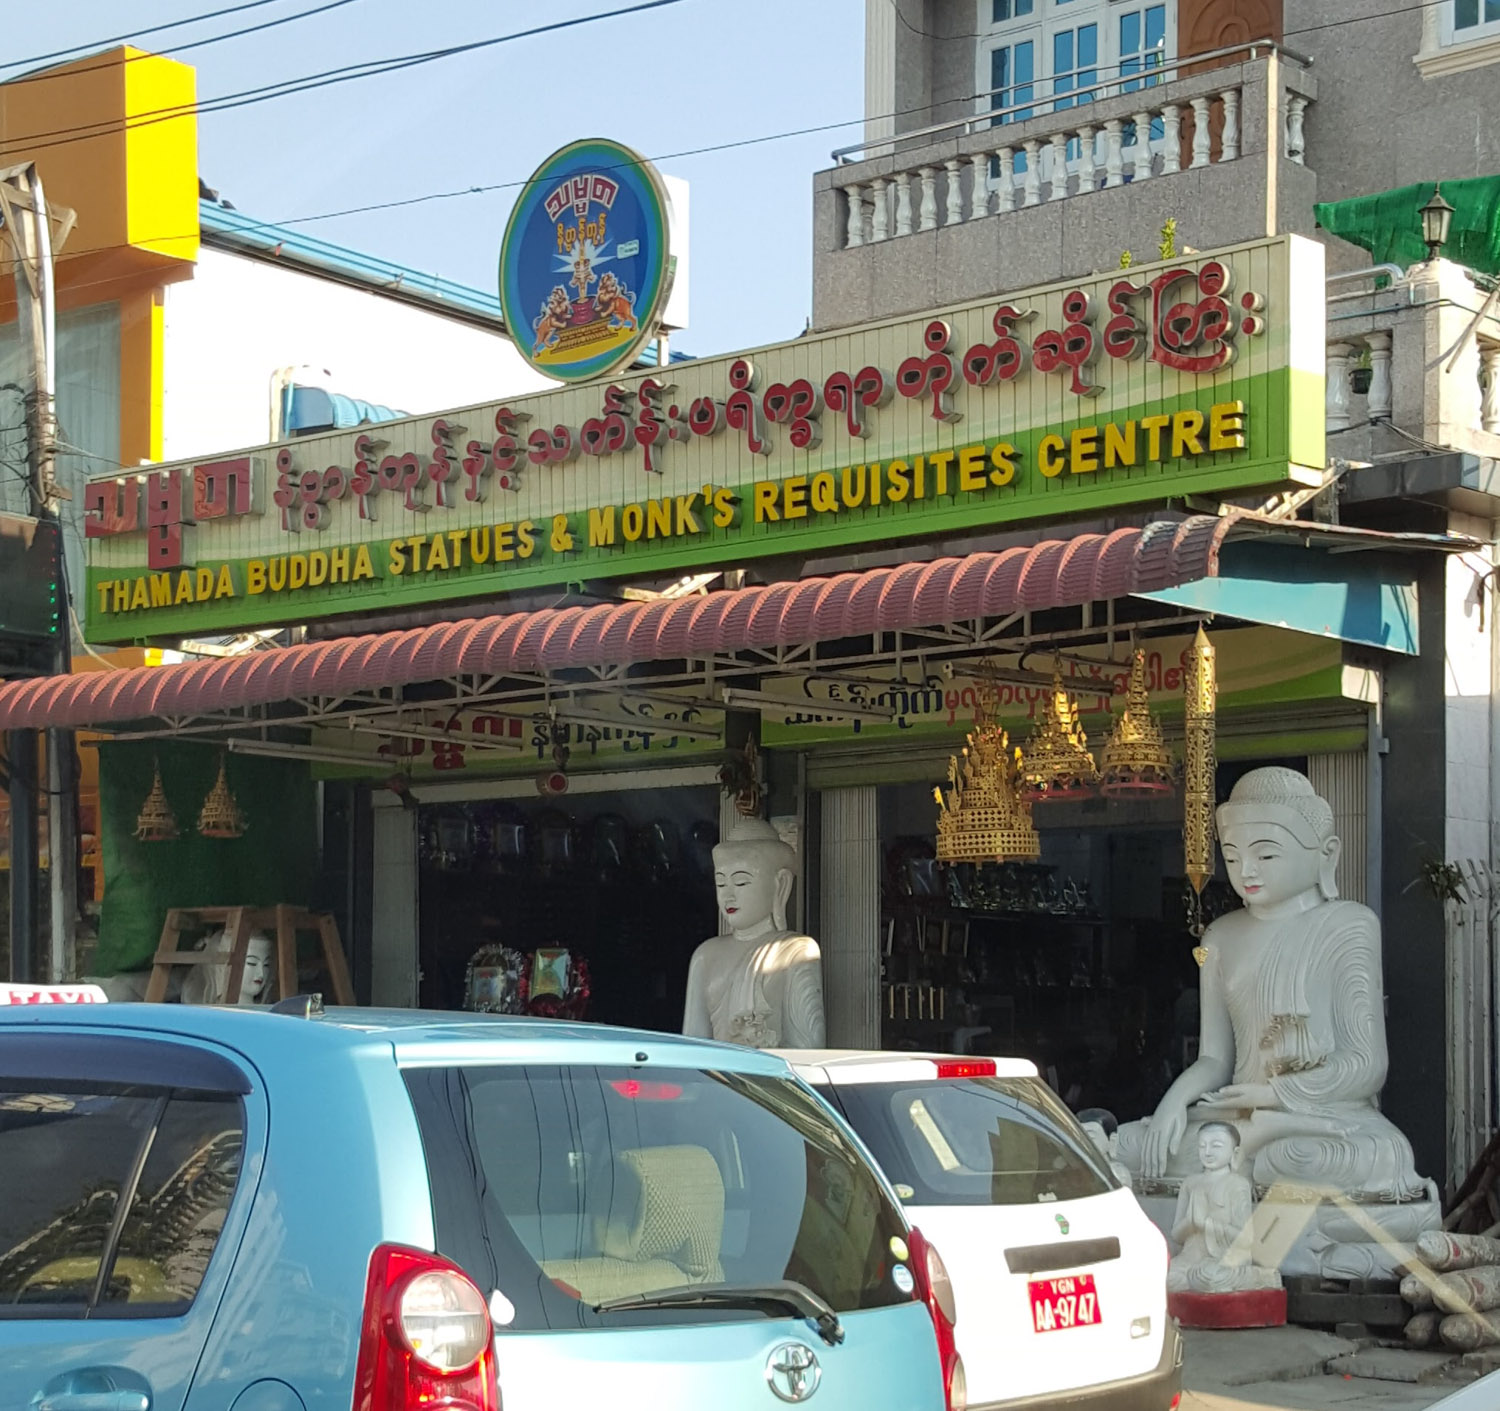 I do all my shopping at the buddha statues and monk's requisites centre.